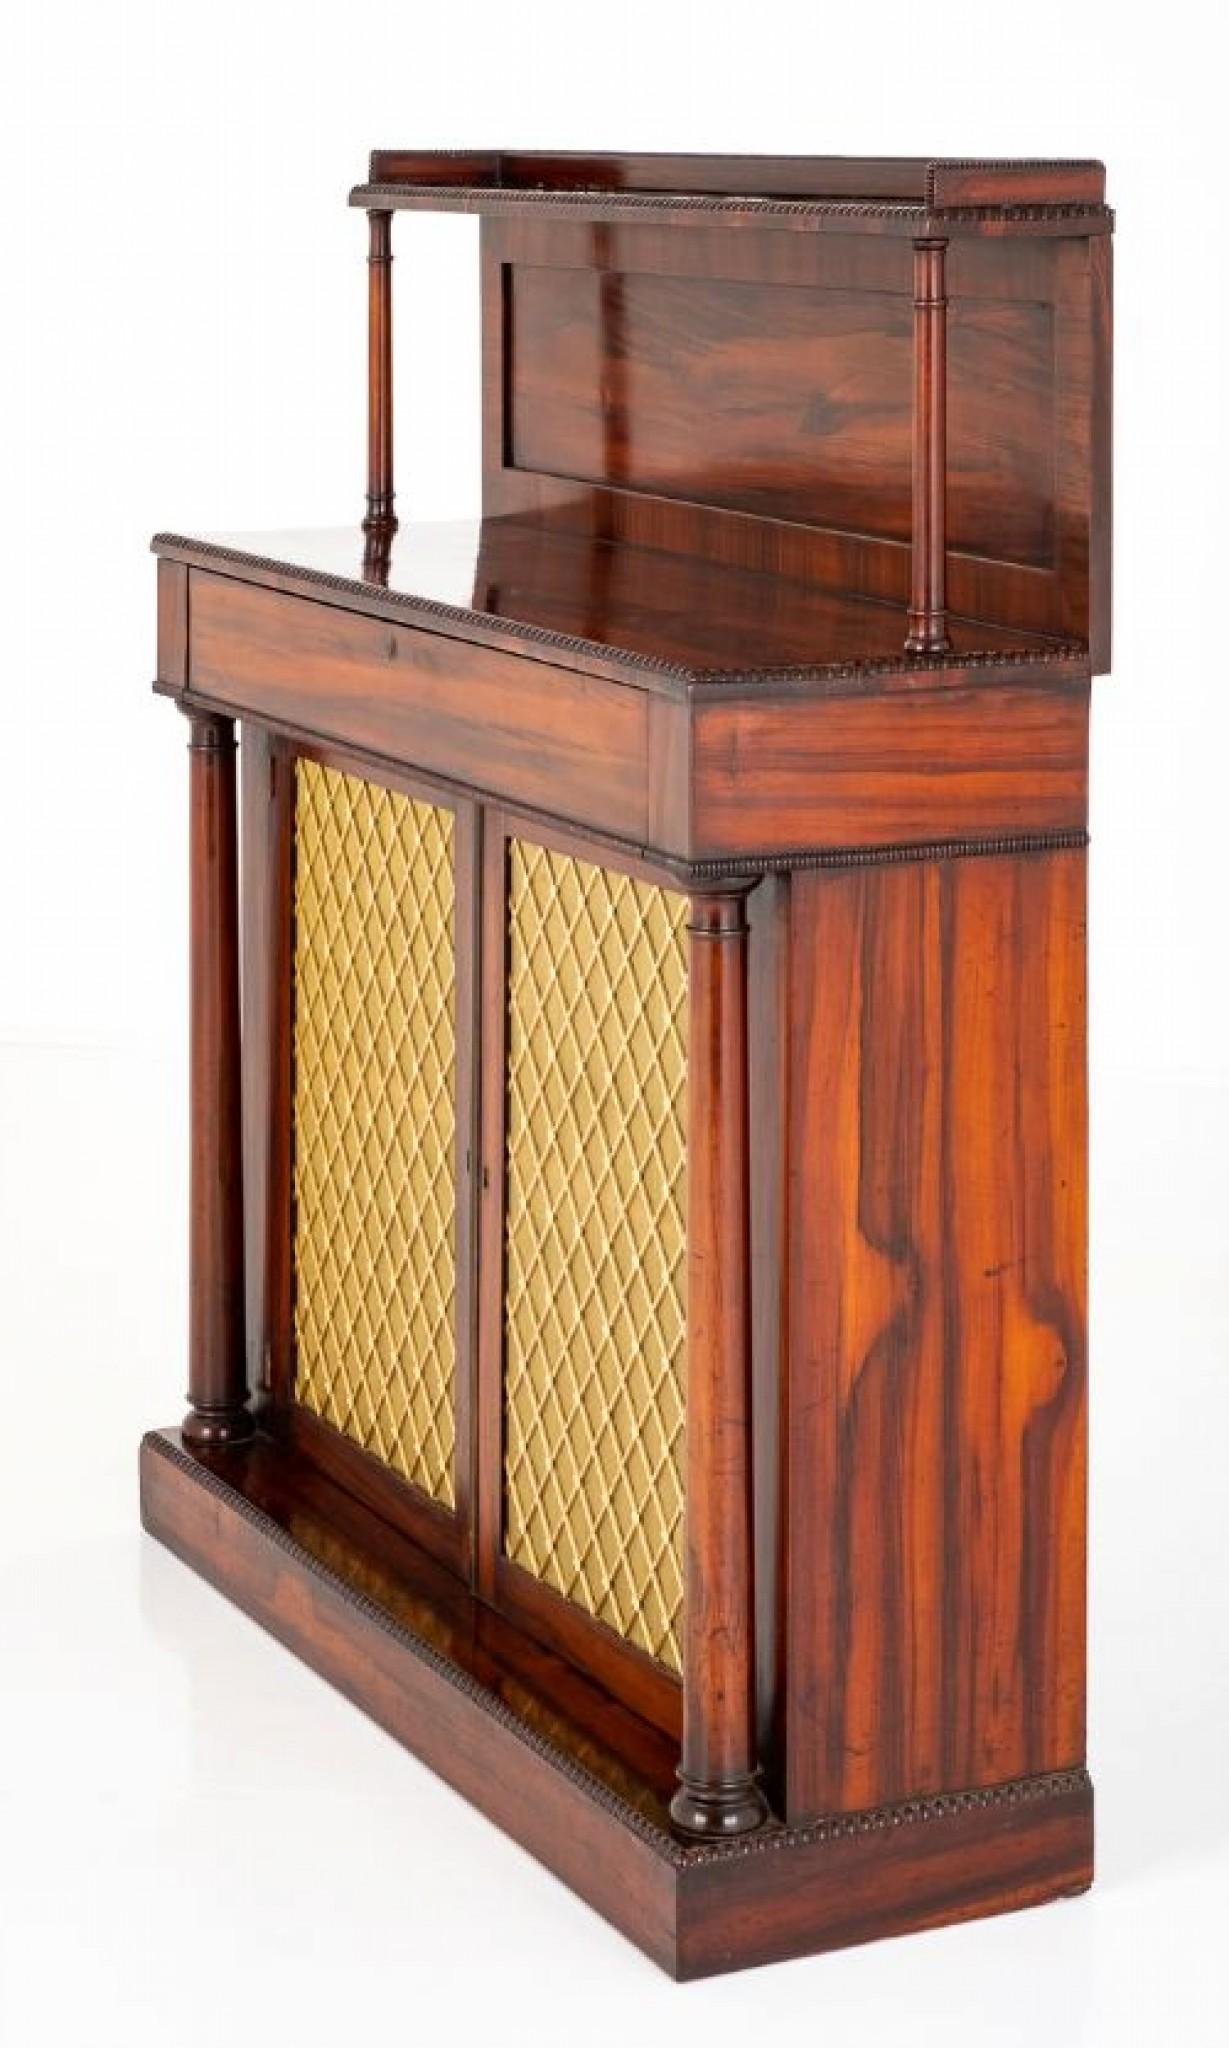 Here we have a good quality regency rosewood chiffonier.
Standing upon a plinth base.
The 2 doors having gilt lattice grills with pleased curtains behind and open to reveal 1 loose shelf.
The doors are flanked by turned pillars.
Featuring 1